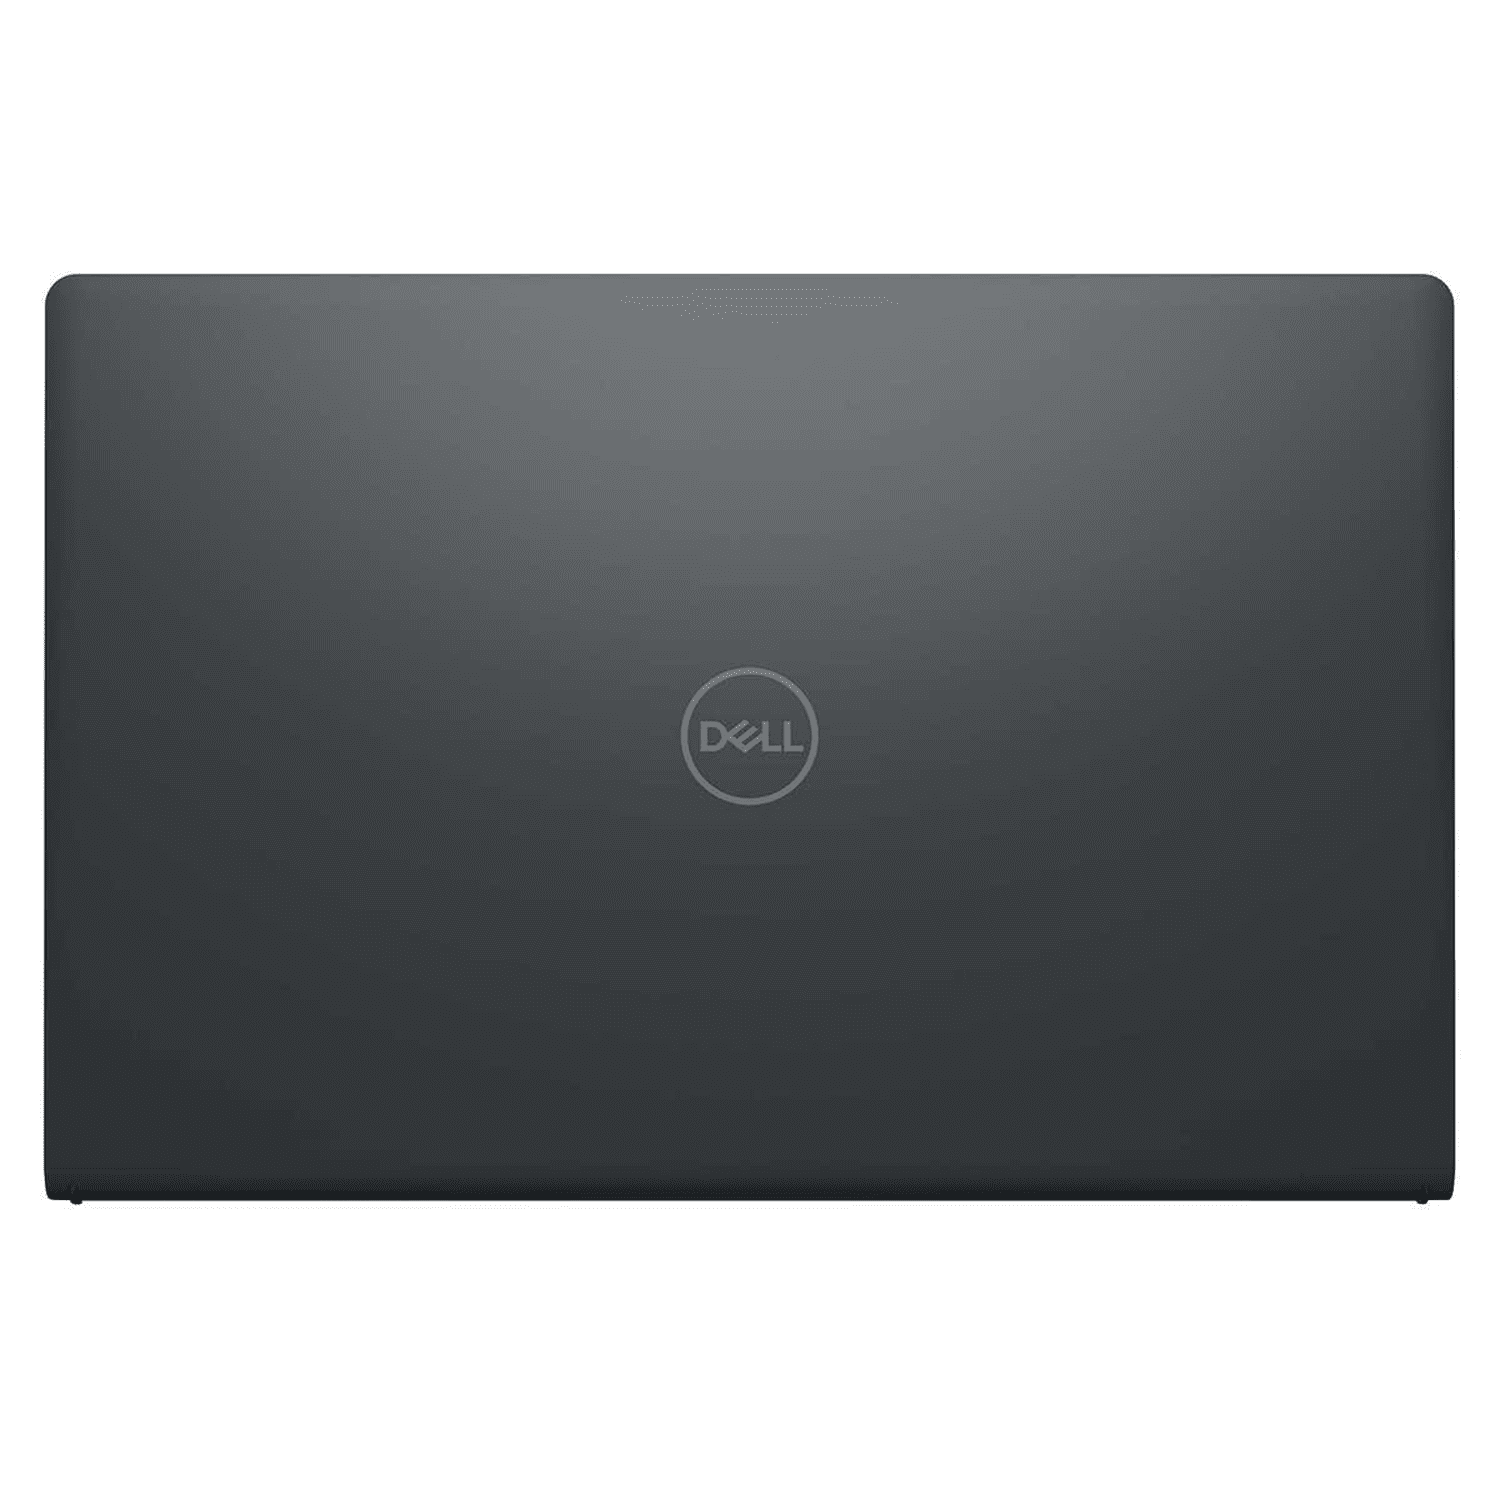 Dell Inspiron 15 Laptop - w/ Windows 11 Os - 15.6 FHD Screen - AMD Radeon Graphics with Shared Graphics Memory - 16 GB - 1T - nn3525ghhvs